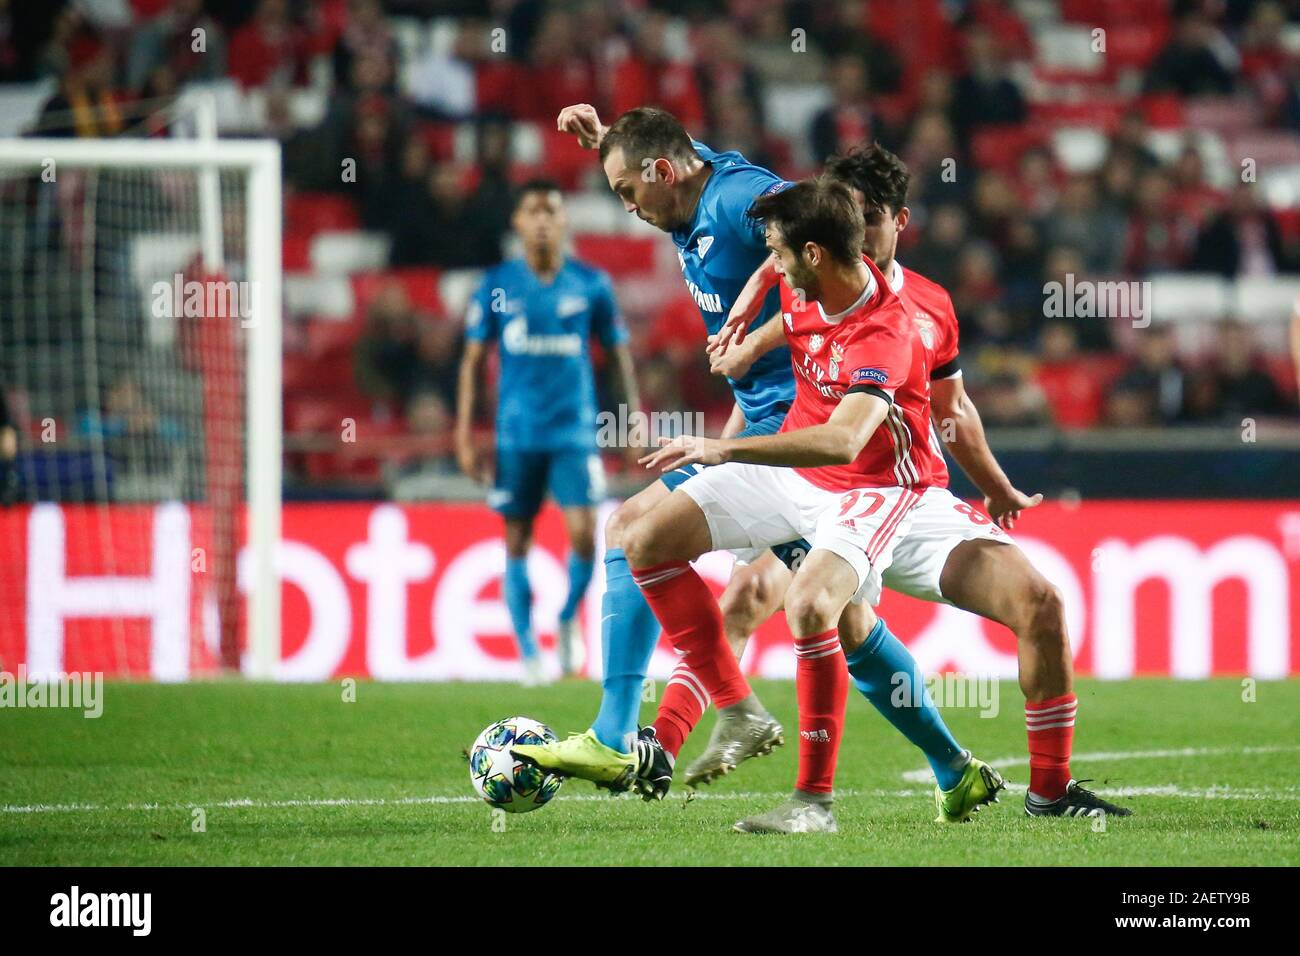 Saint Petersburg, Russia. 10th Dec, 2019. Chiquinho (Francisco Leonel Lima Silva Machado) (C) of Benfica and Artem Dzyuba (L) of Zenit are seen in action during the UEFA Champions League group G match between SL Benfica Lisbon and Zenit at Gazprom Arena in St. Petersburg.(Final score; SL Benfica Lisbon 3:0 Zenit) Credit: SOPA Images Limited/Alamy Live News Stock Photo